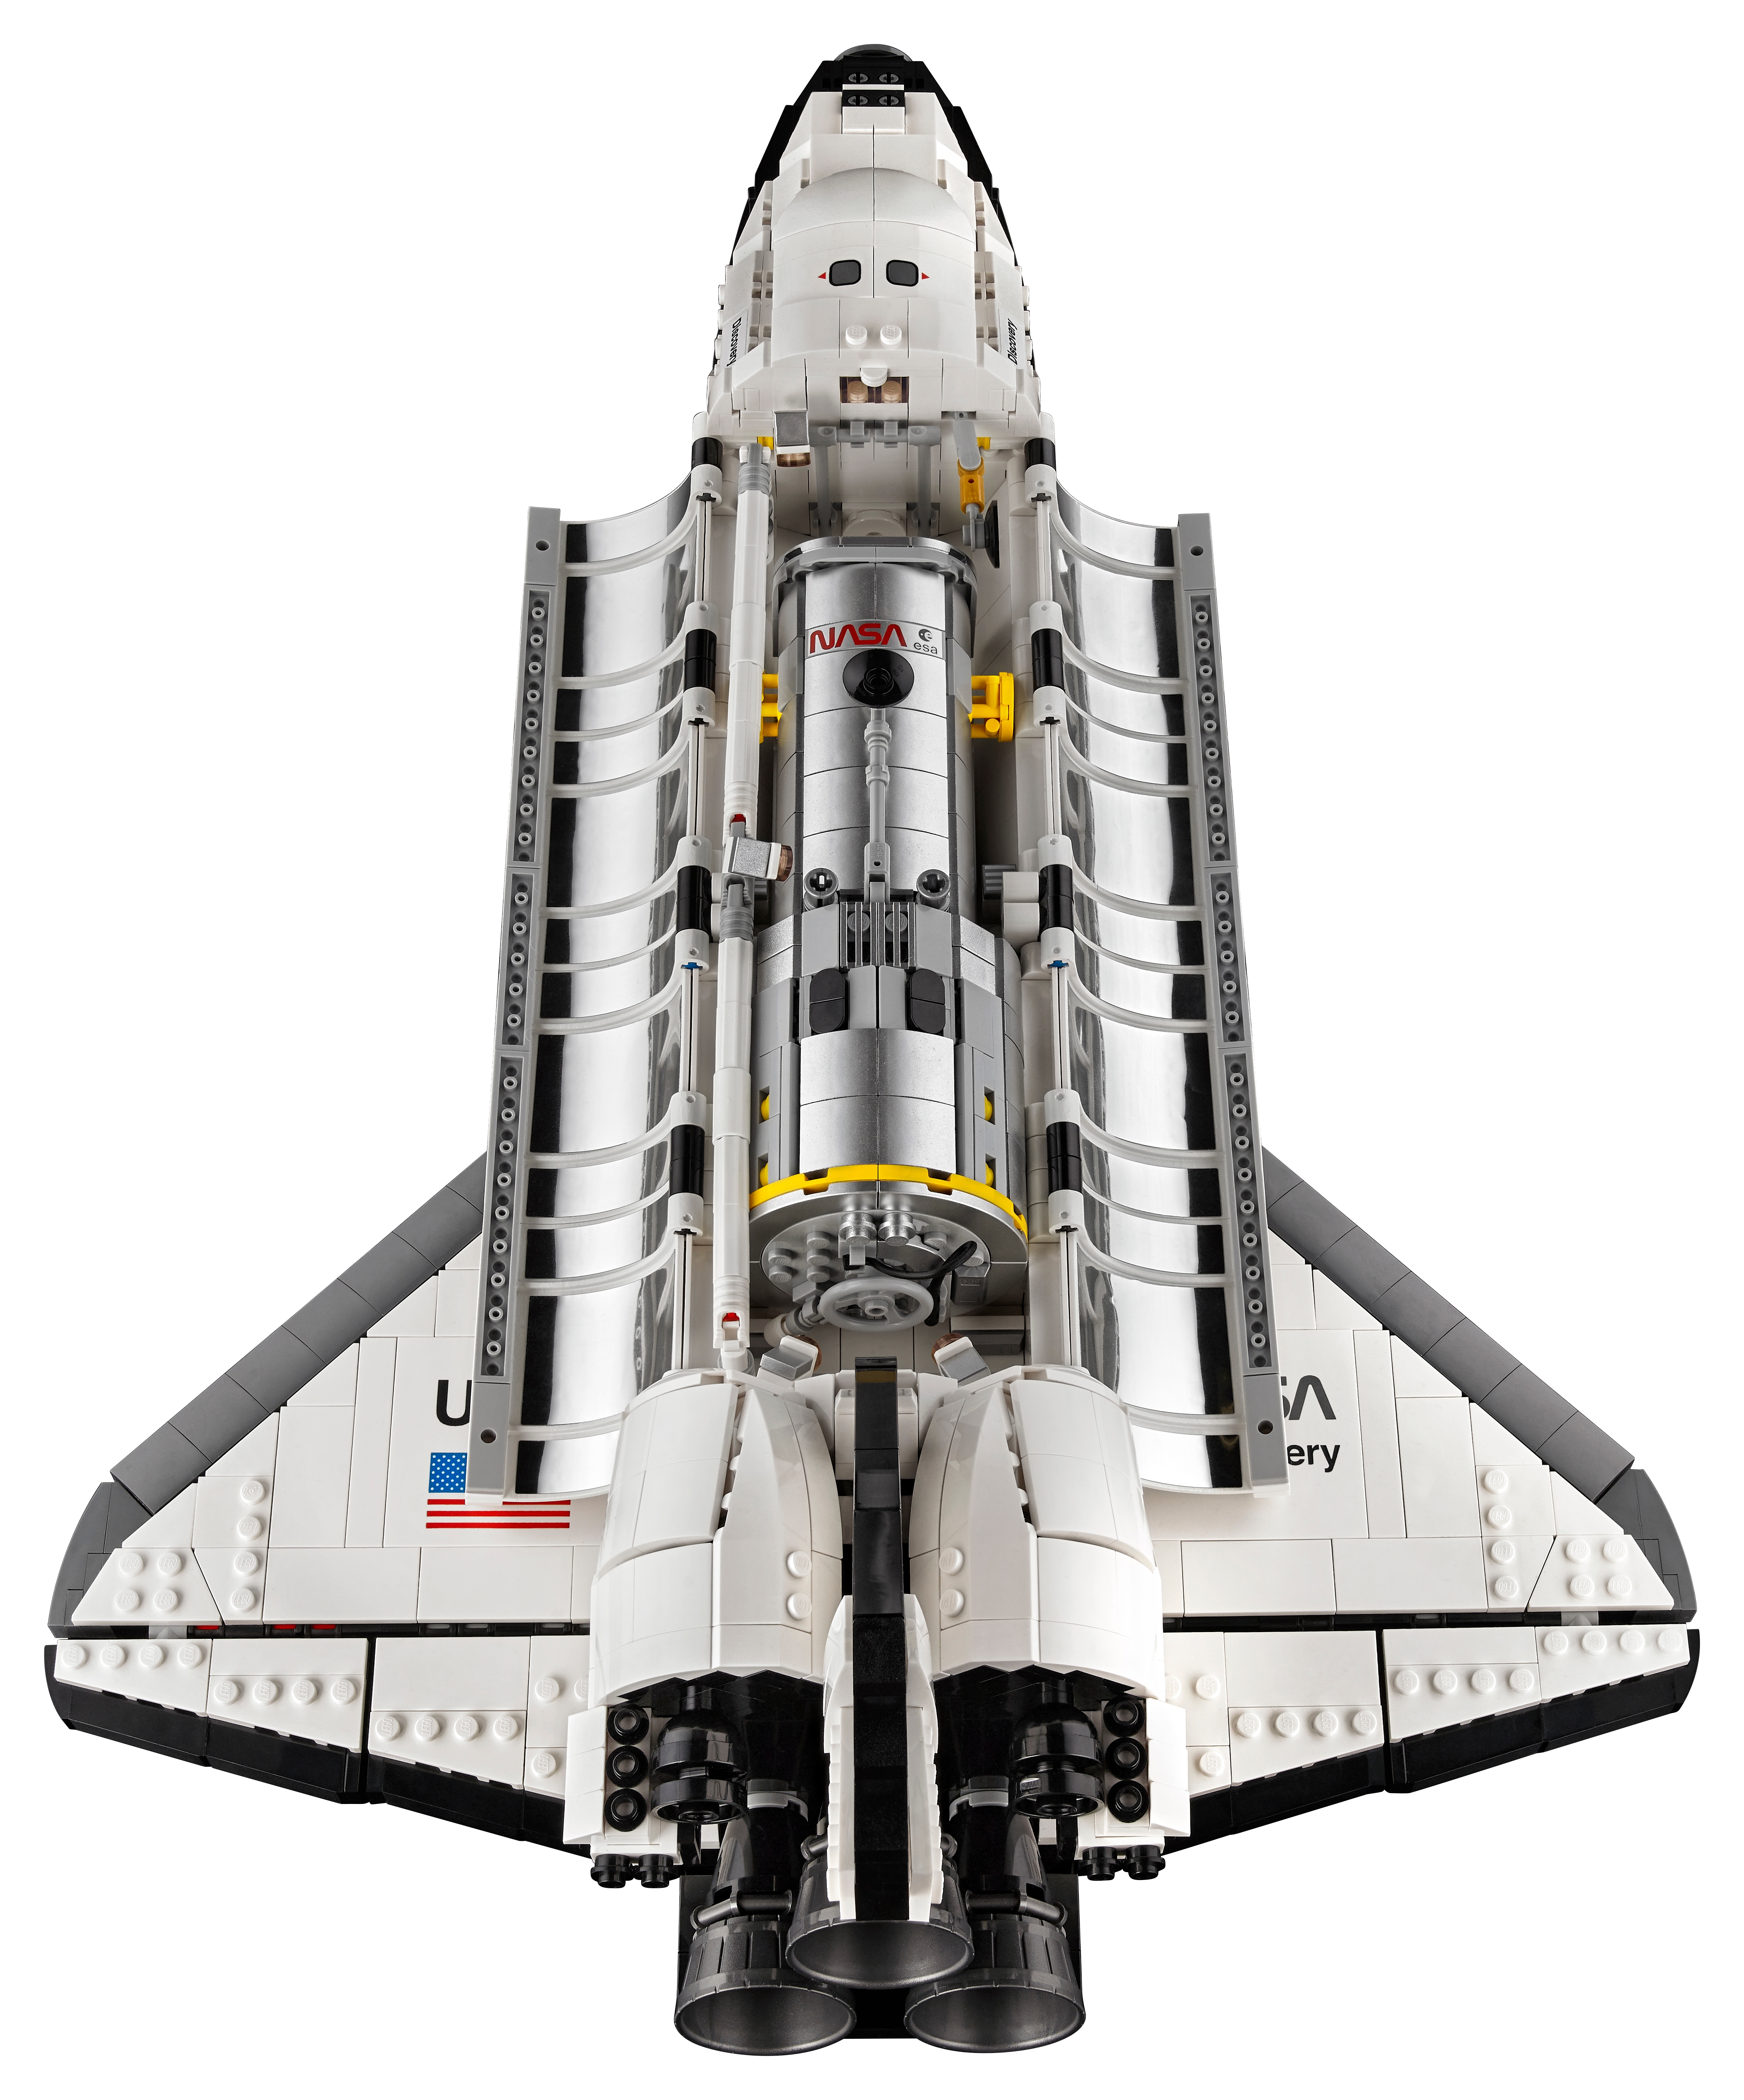 LEGO Space Shuttle Discovery 